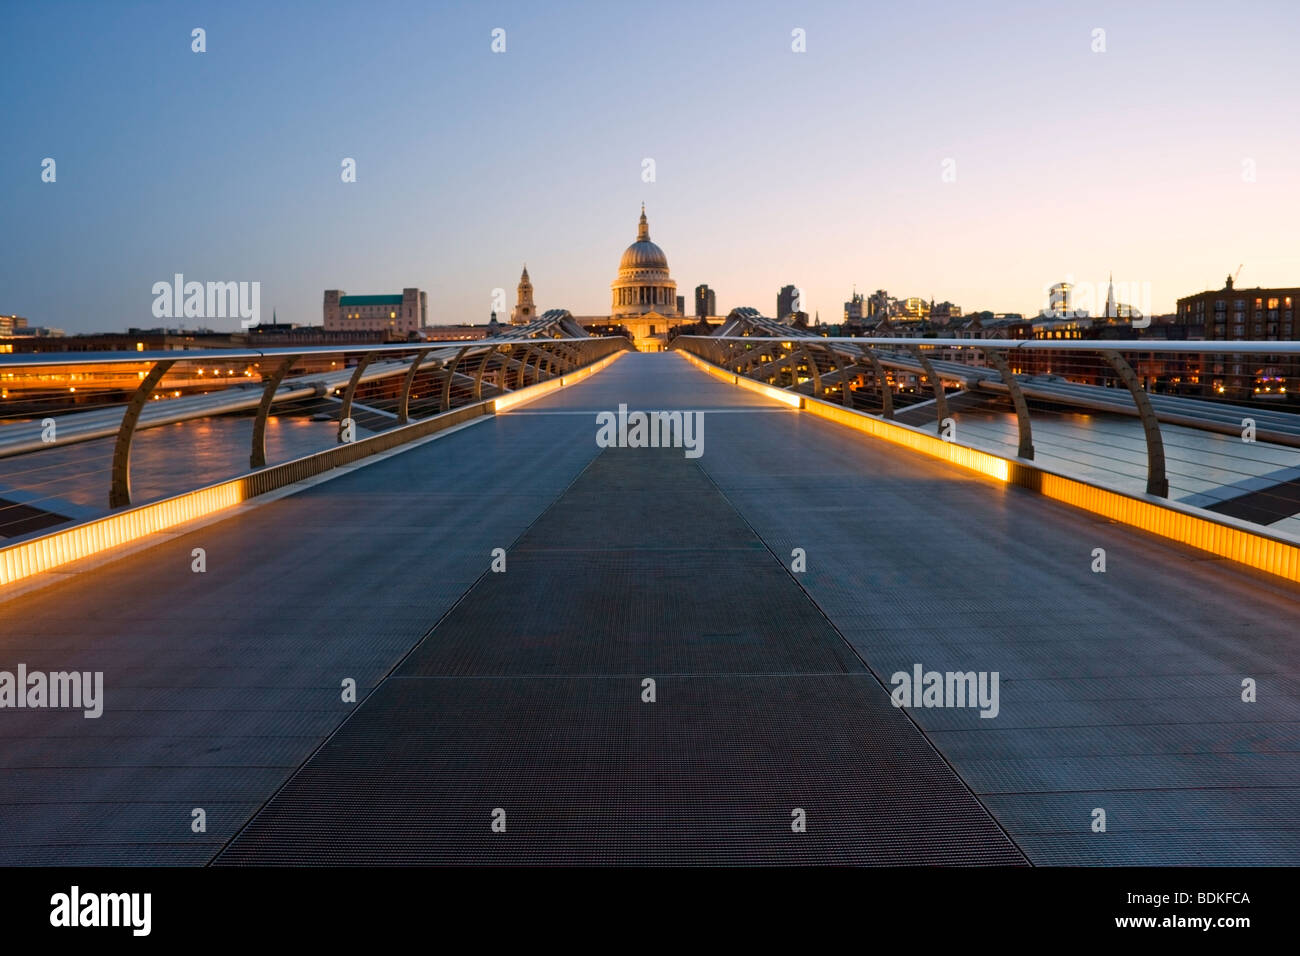 Millennium Bridge in London with St Paul's Cathedral in the background and early sunrise light Stock Photo